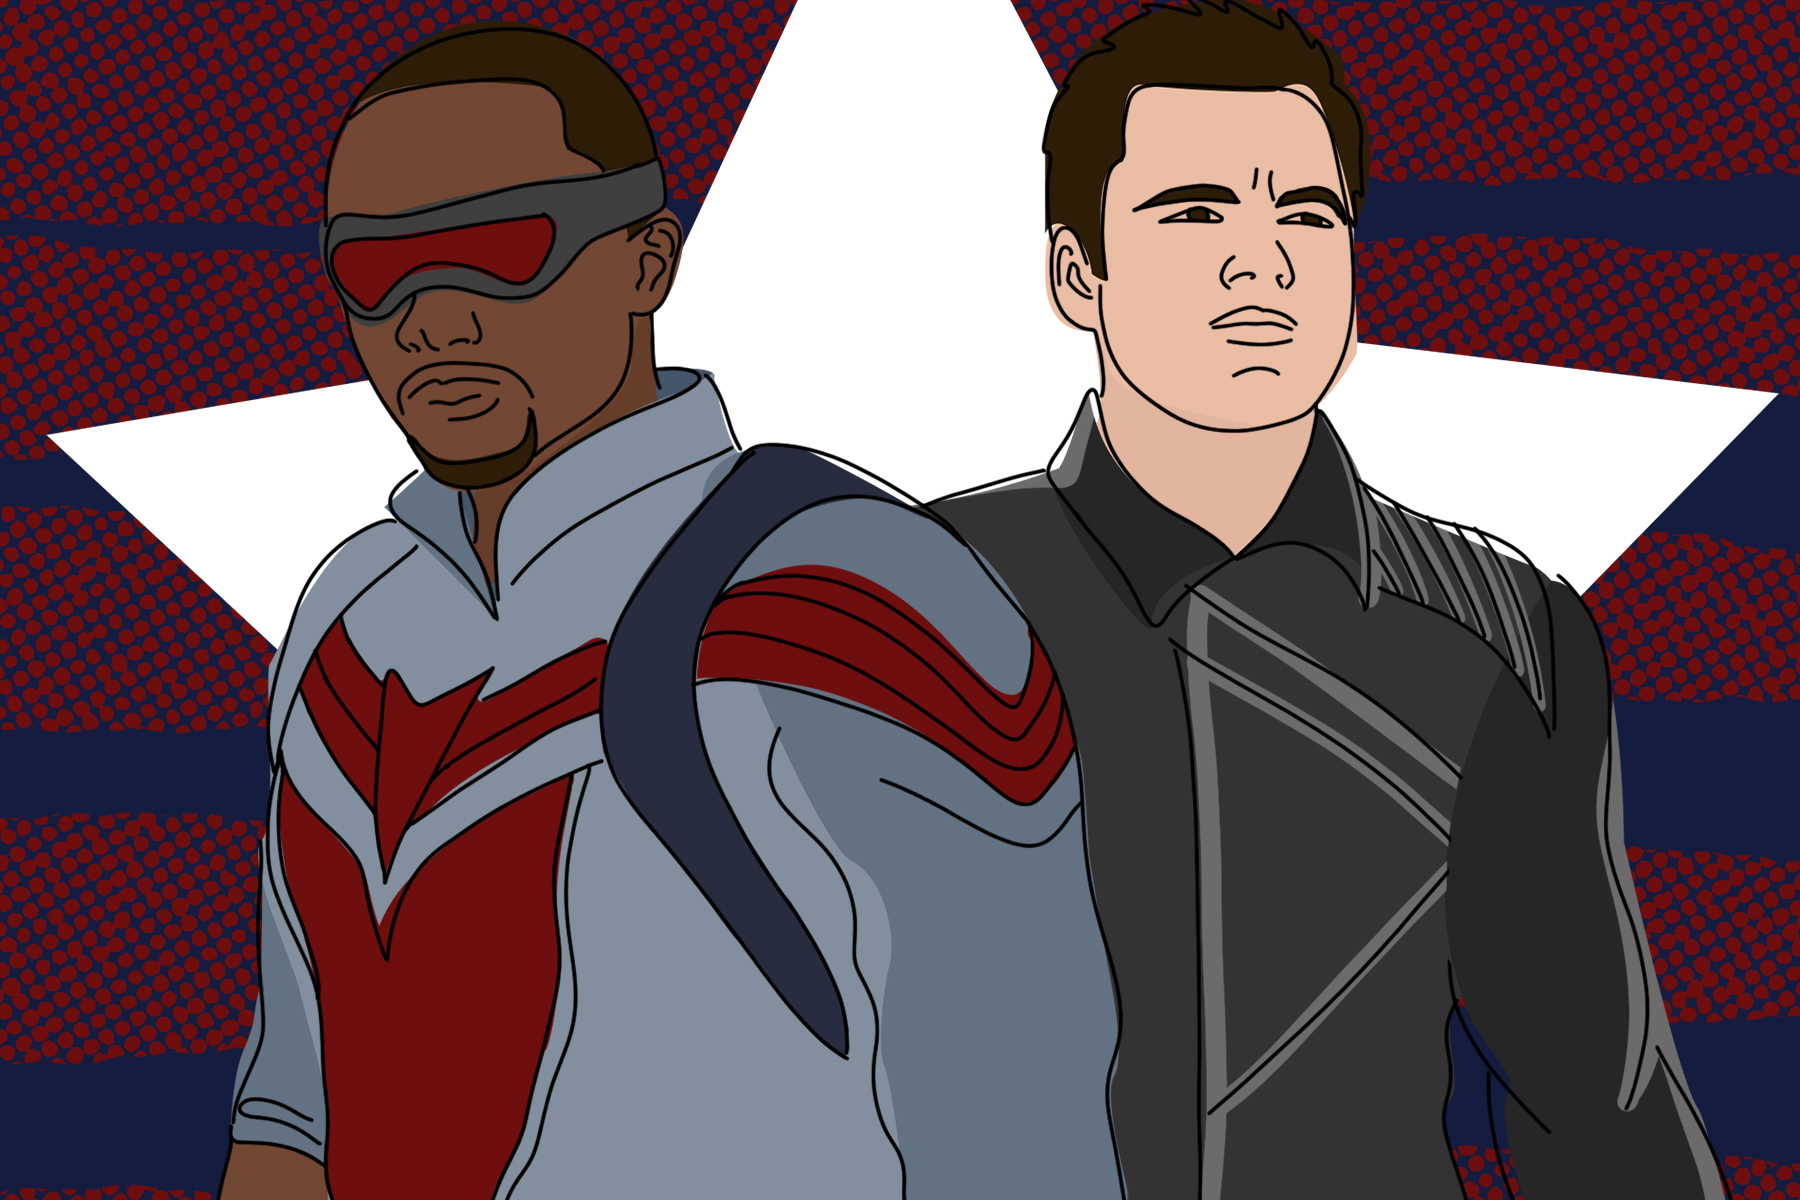 An illustration of the main characters of The Falcon and the Winter Soldier.